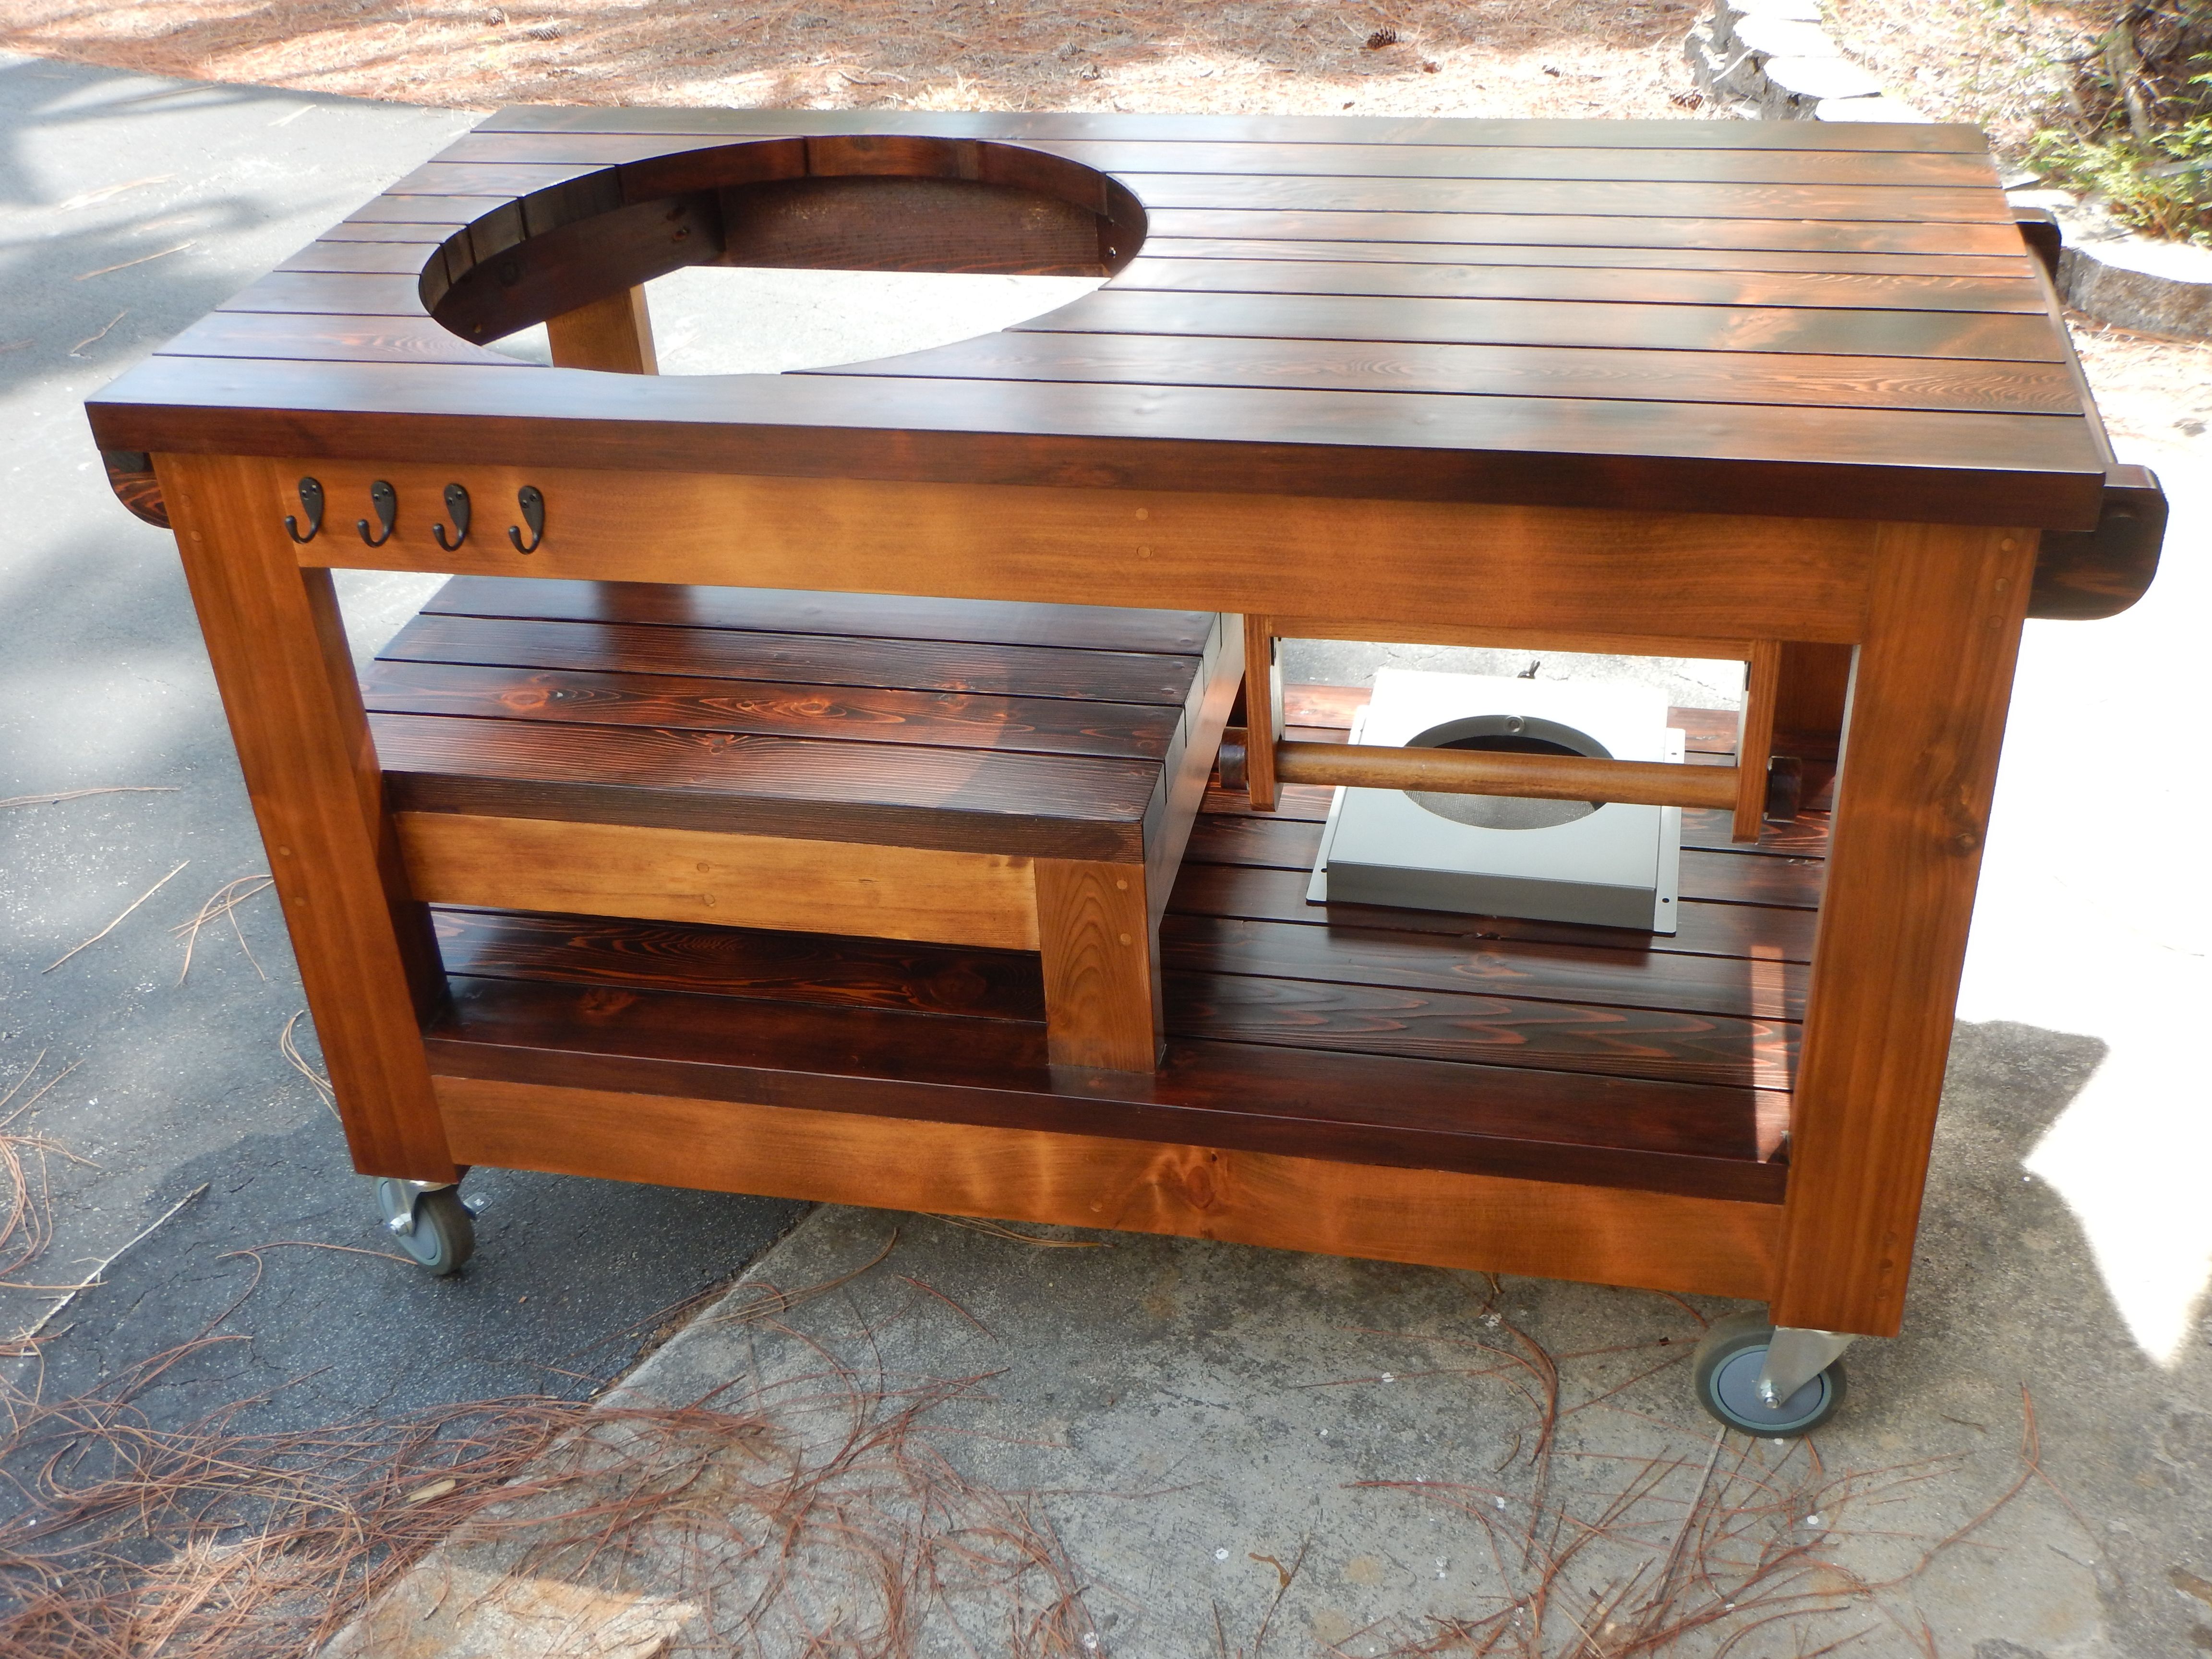 Custom Grill Table For A Ceramic, Outdoor Wood Grill Table